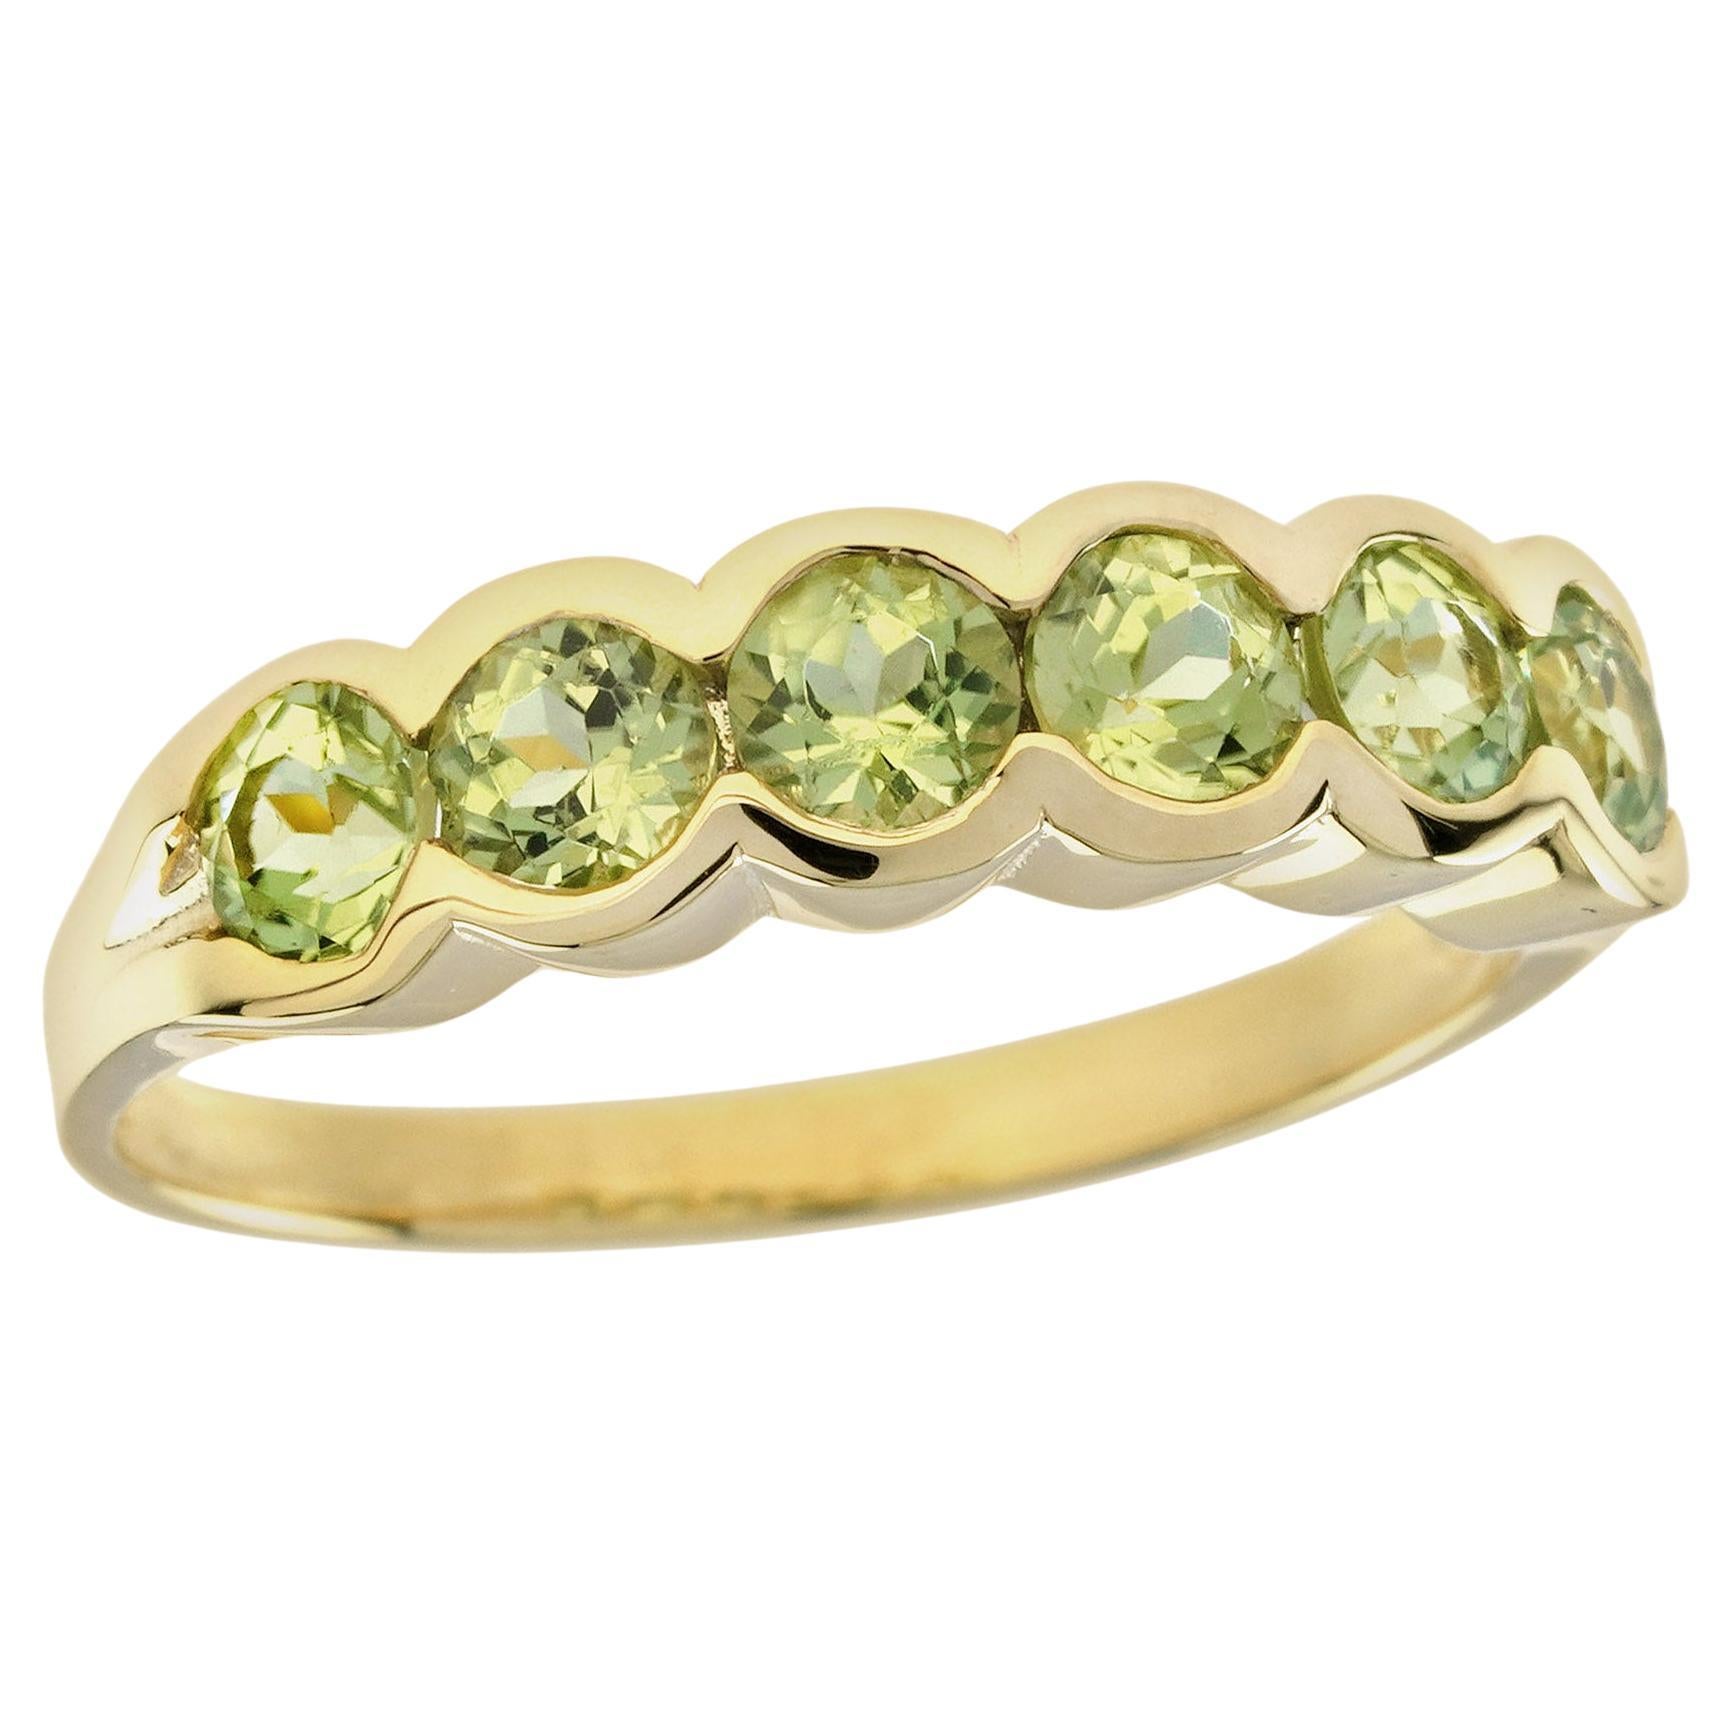 Natural Peridot Vintage Style Half Eternity Ring in Solid 9K Yellow Gold